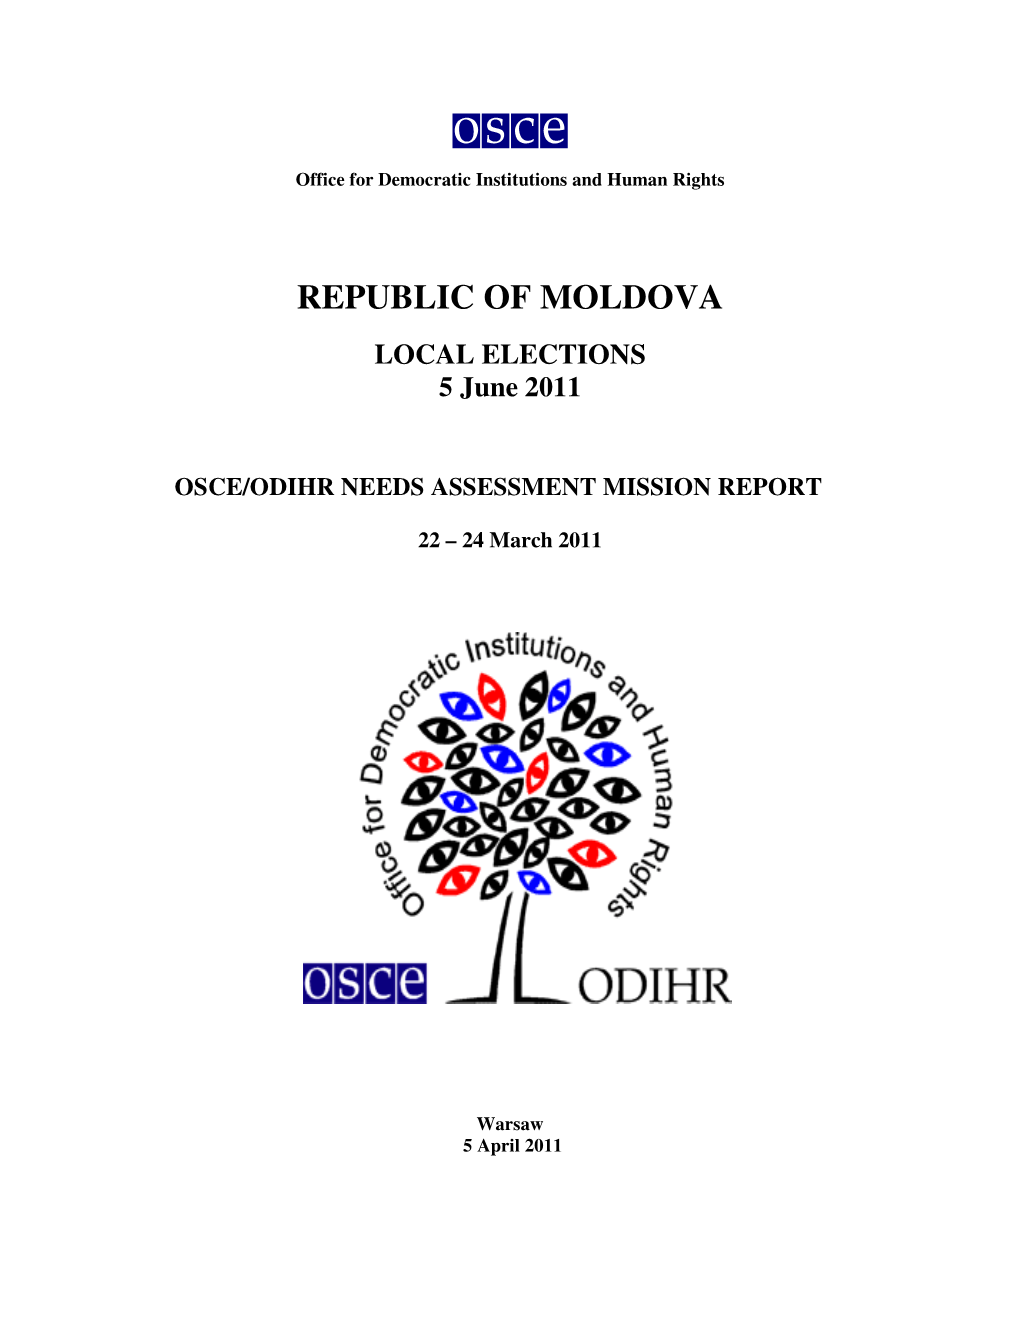 Moldova: Needs Assessment Mission Report, Local Elections of June 5